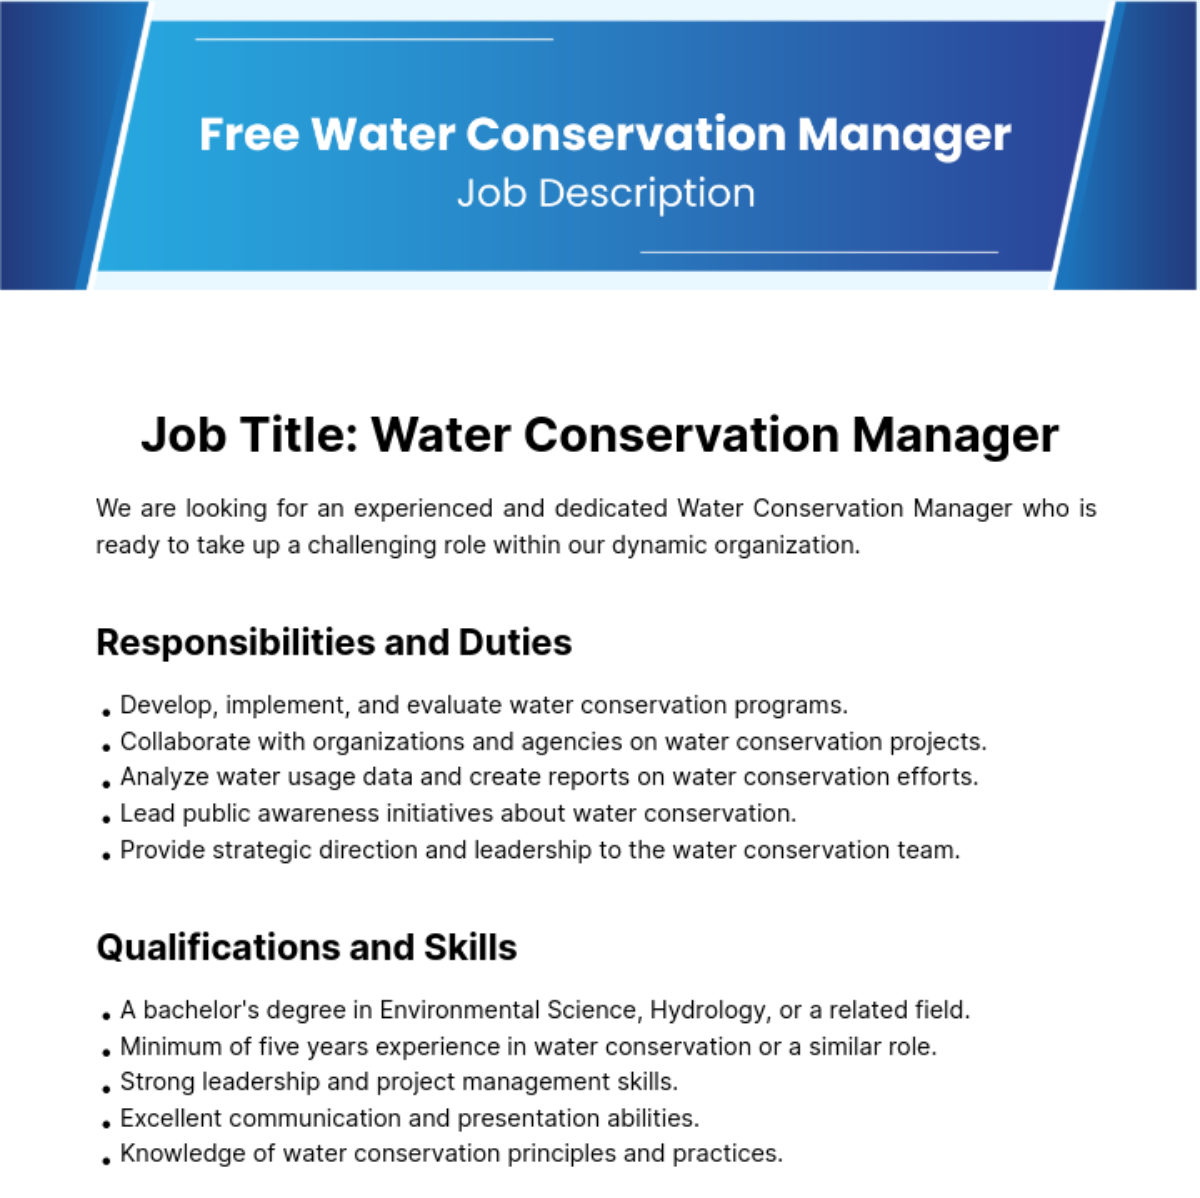 Free Water Conservation Manager Job Description Template